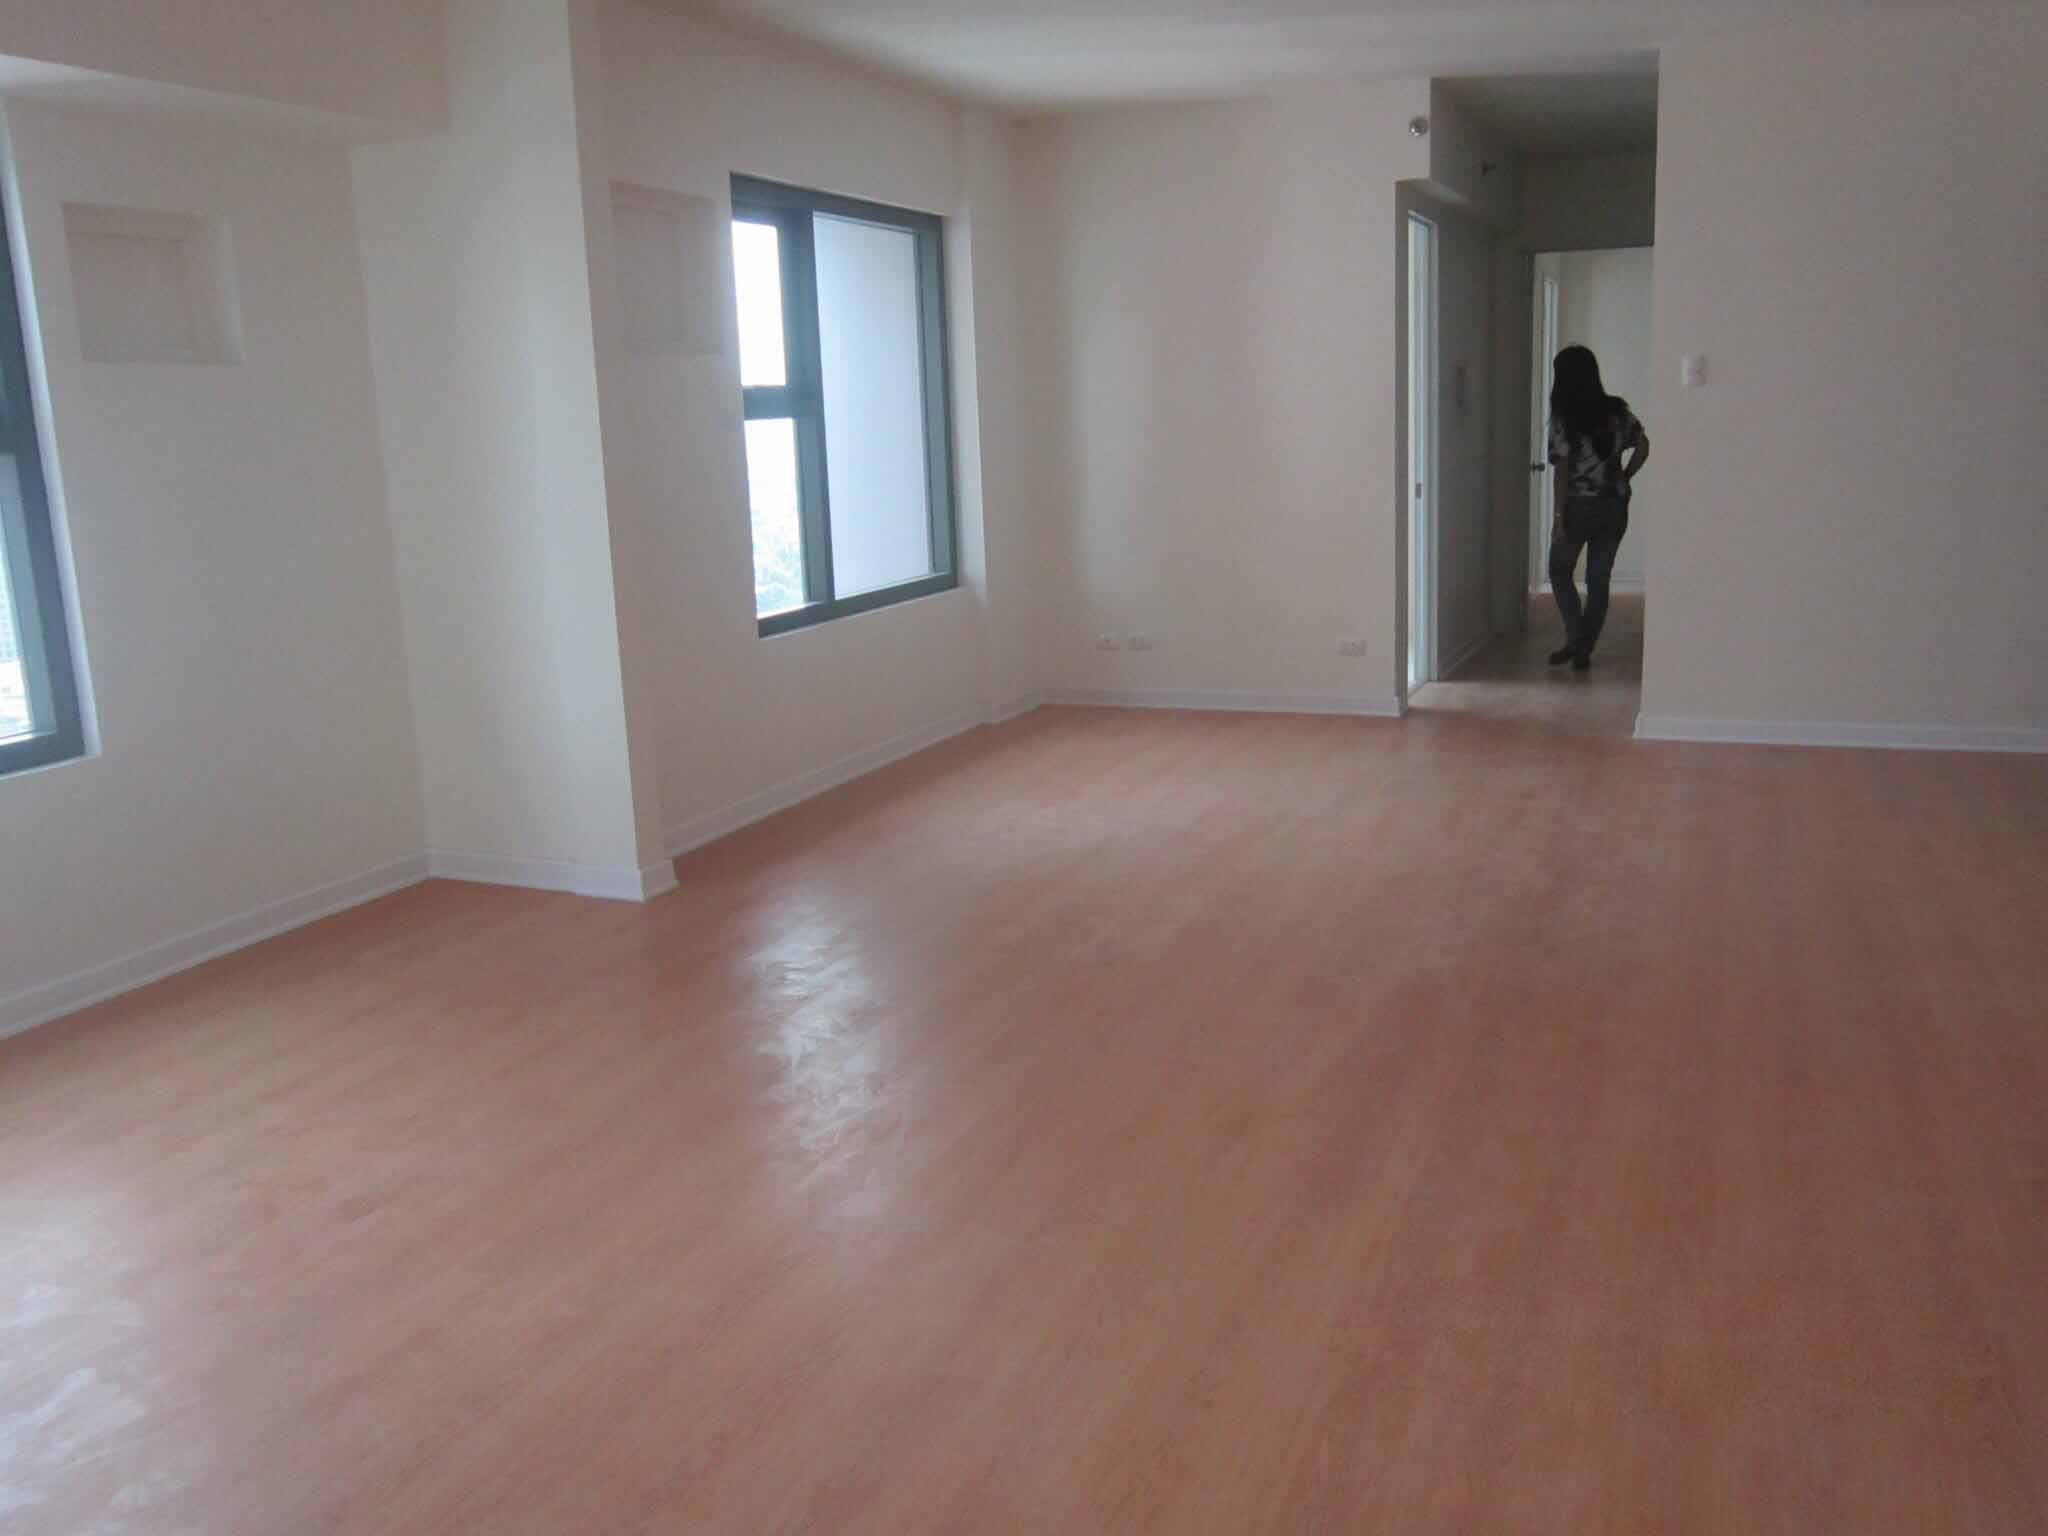 3BR Condo for Sale in Belton Place, Makati